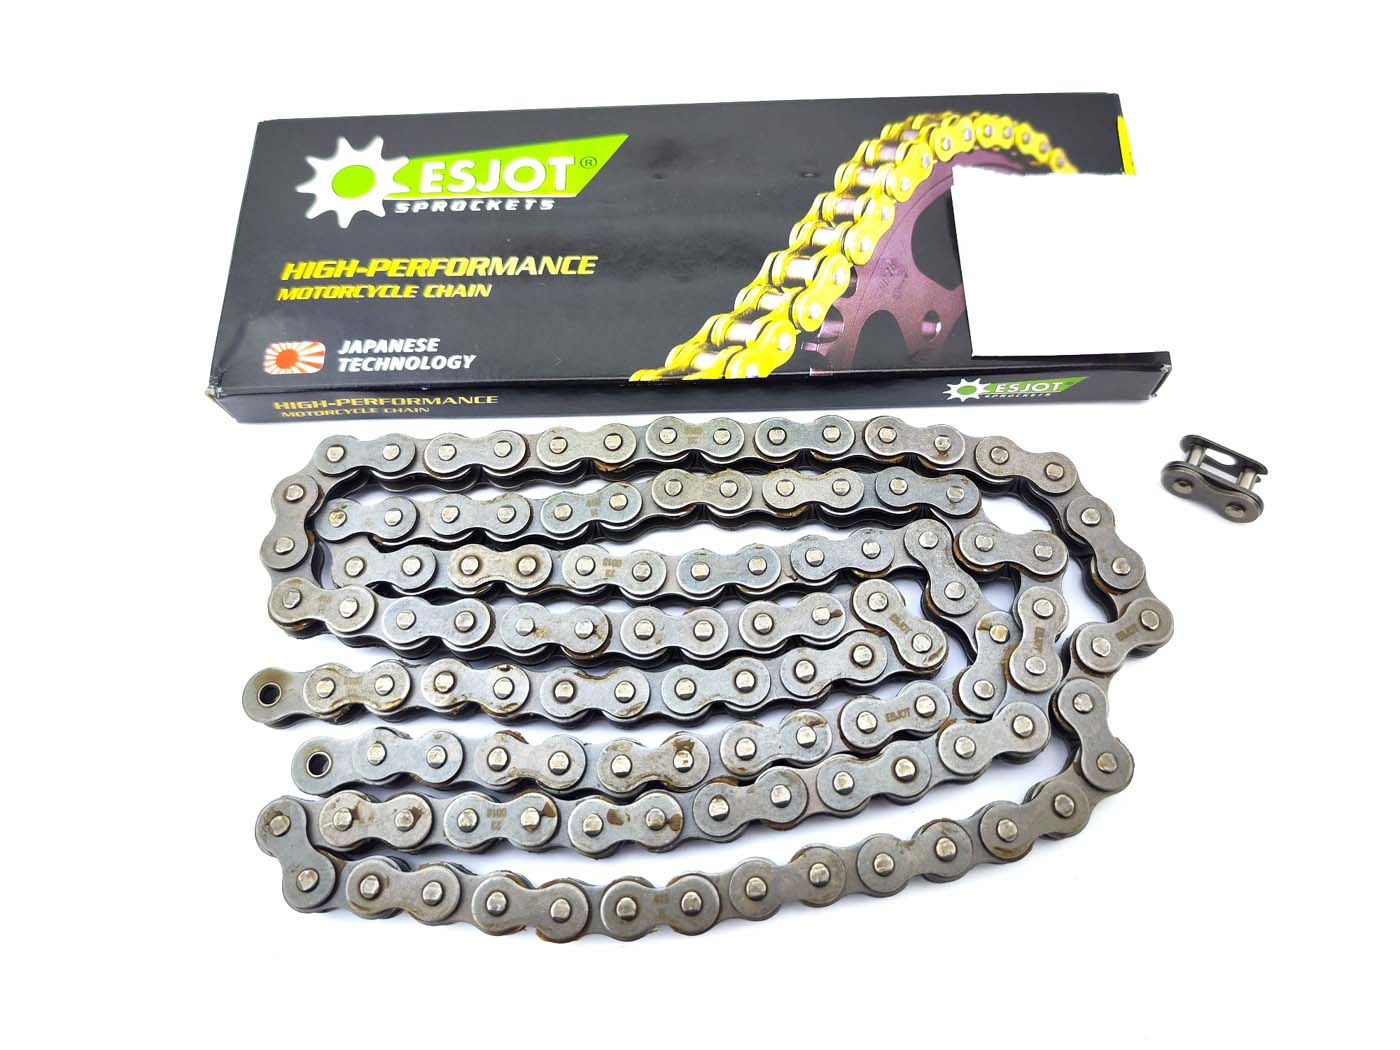 Chain Esjot 78 Links Reinforced For Puch Maxi S N X 30 A Moped Automatic